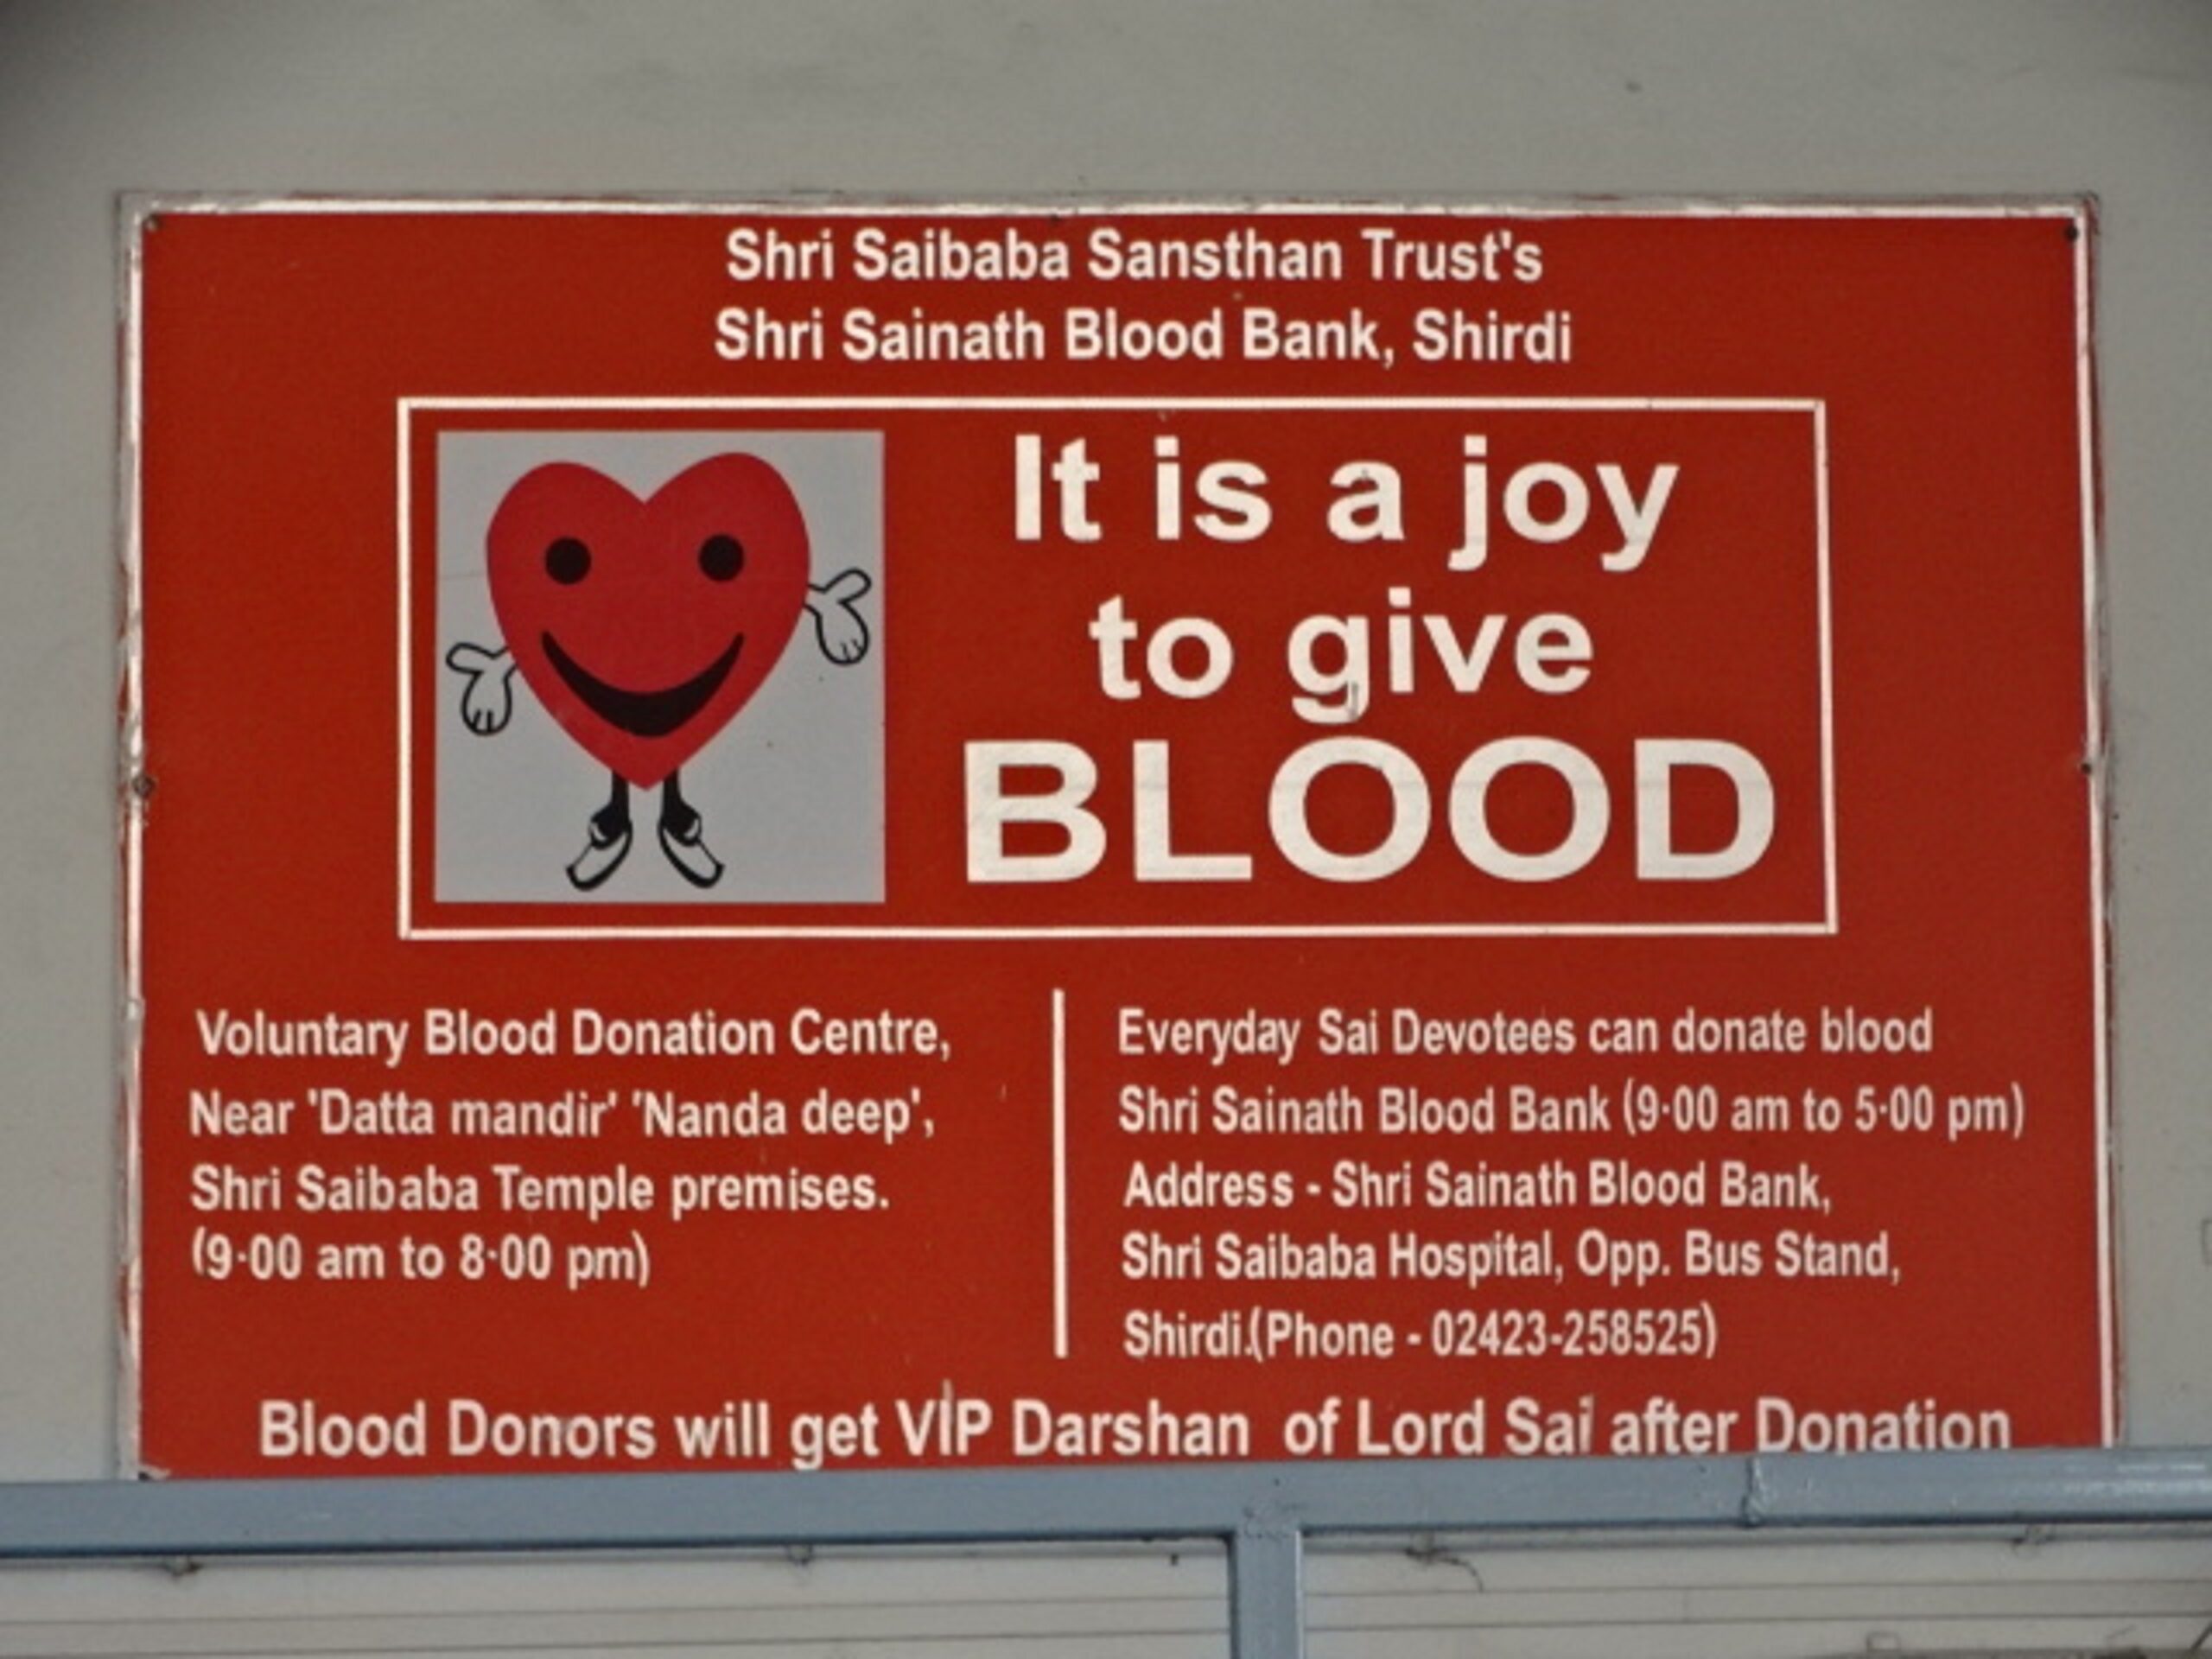 Donate Blood and get VIP Darshan of Lord Sai after Donation